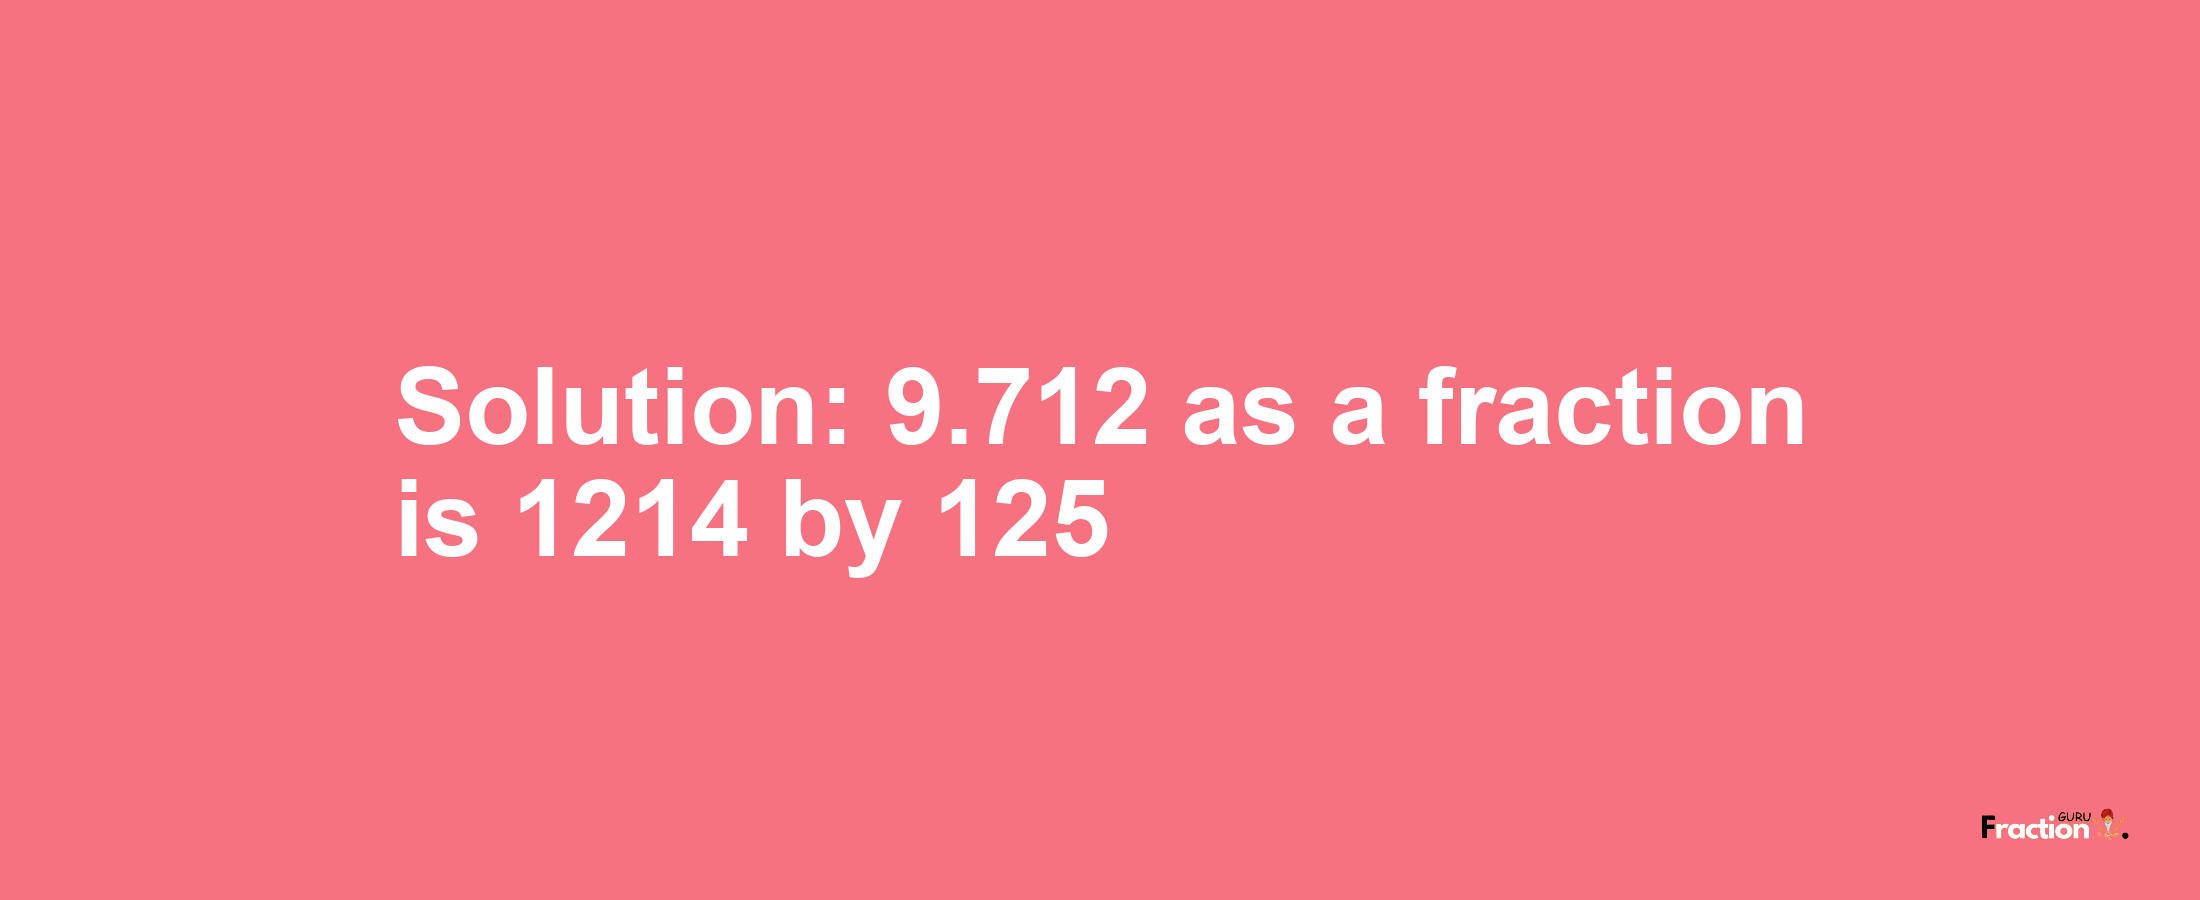 Solution:9.712 as a fraction is 1214/125